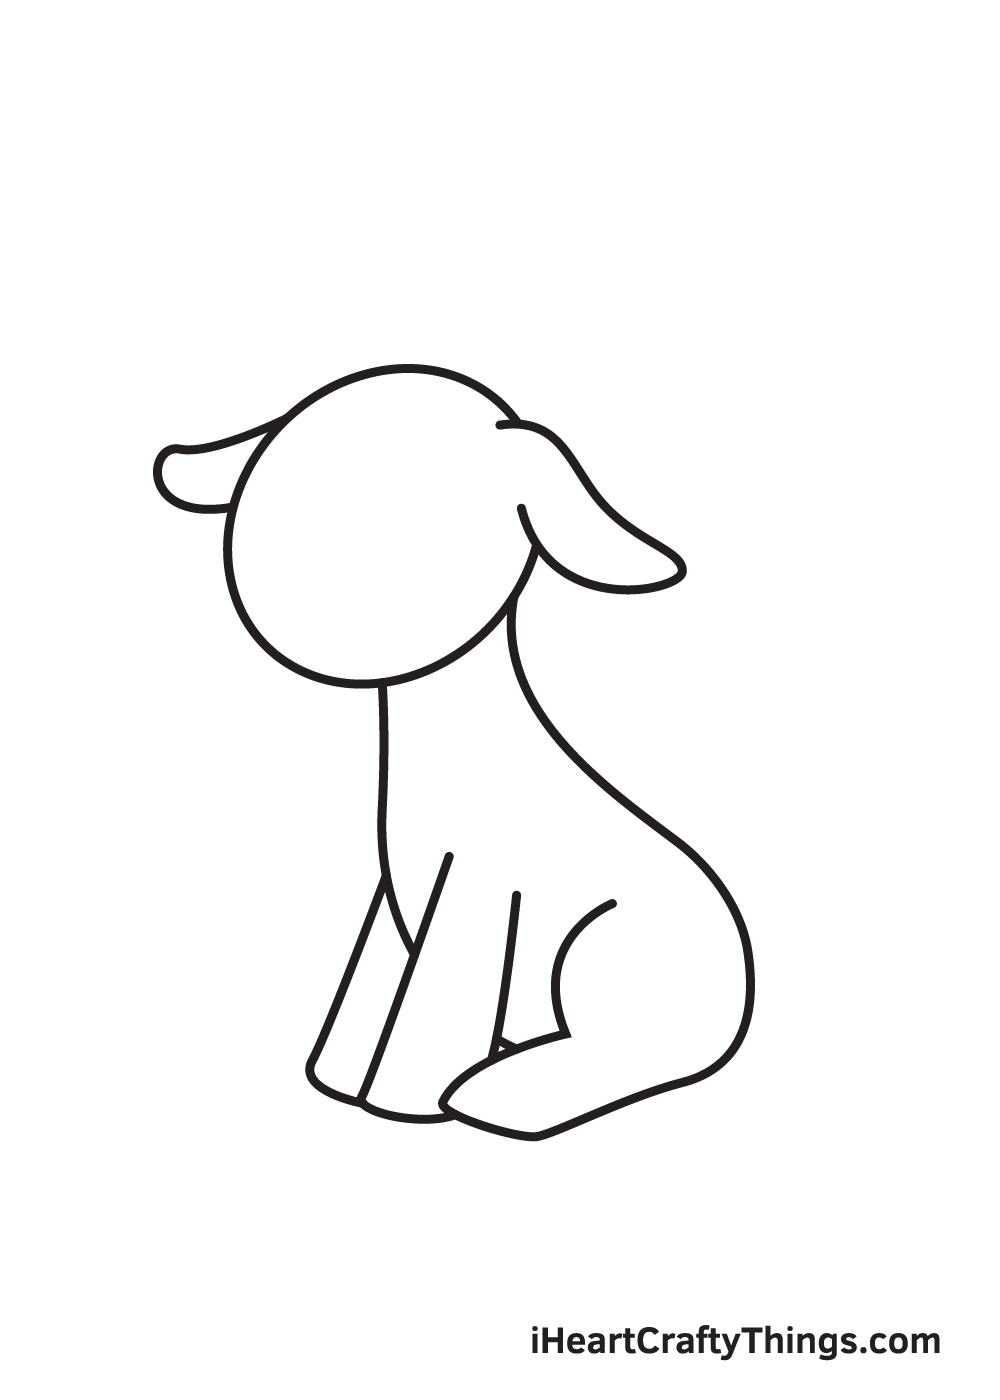 goat drawing - step 5